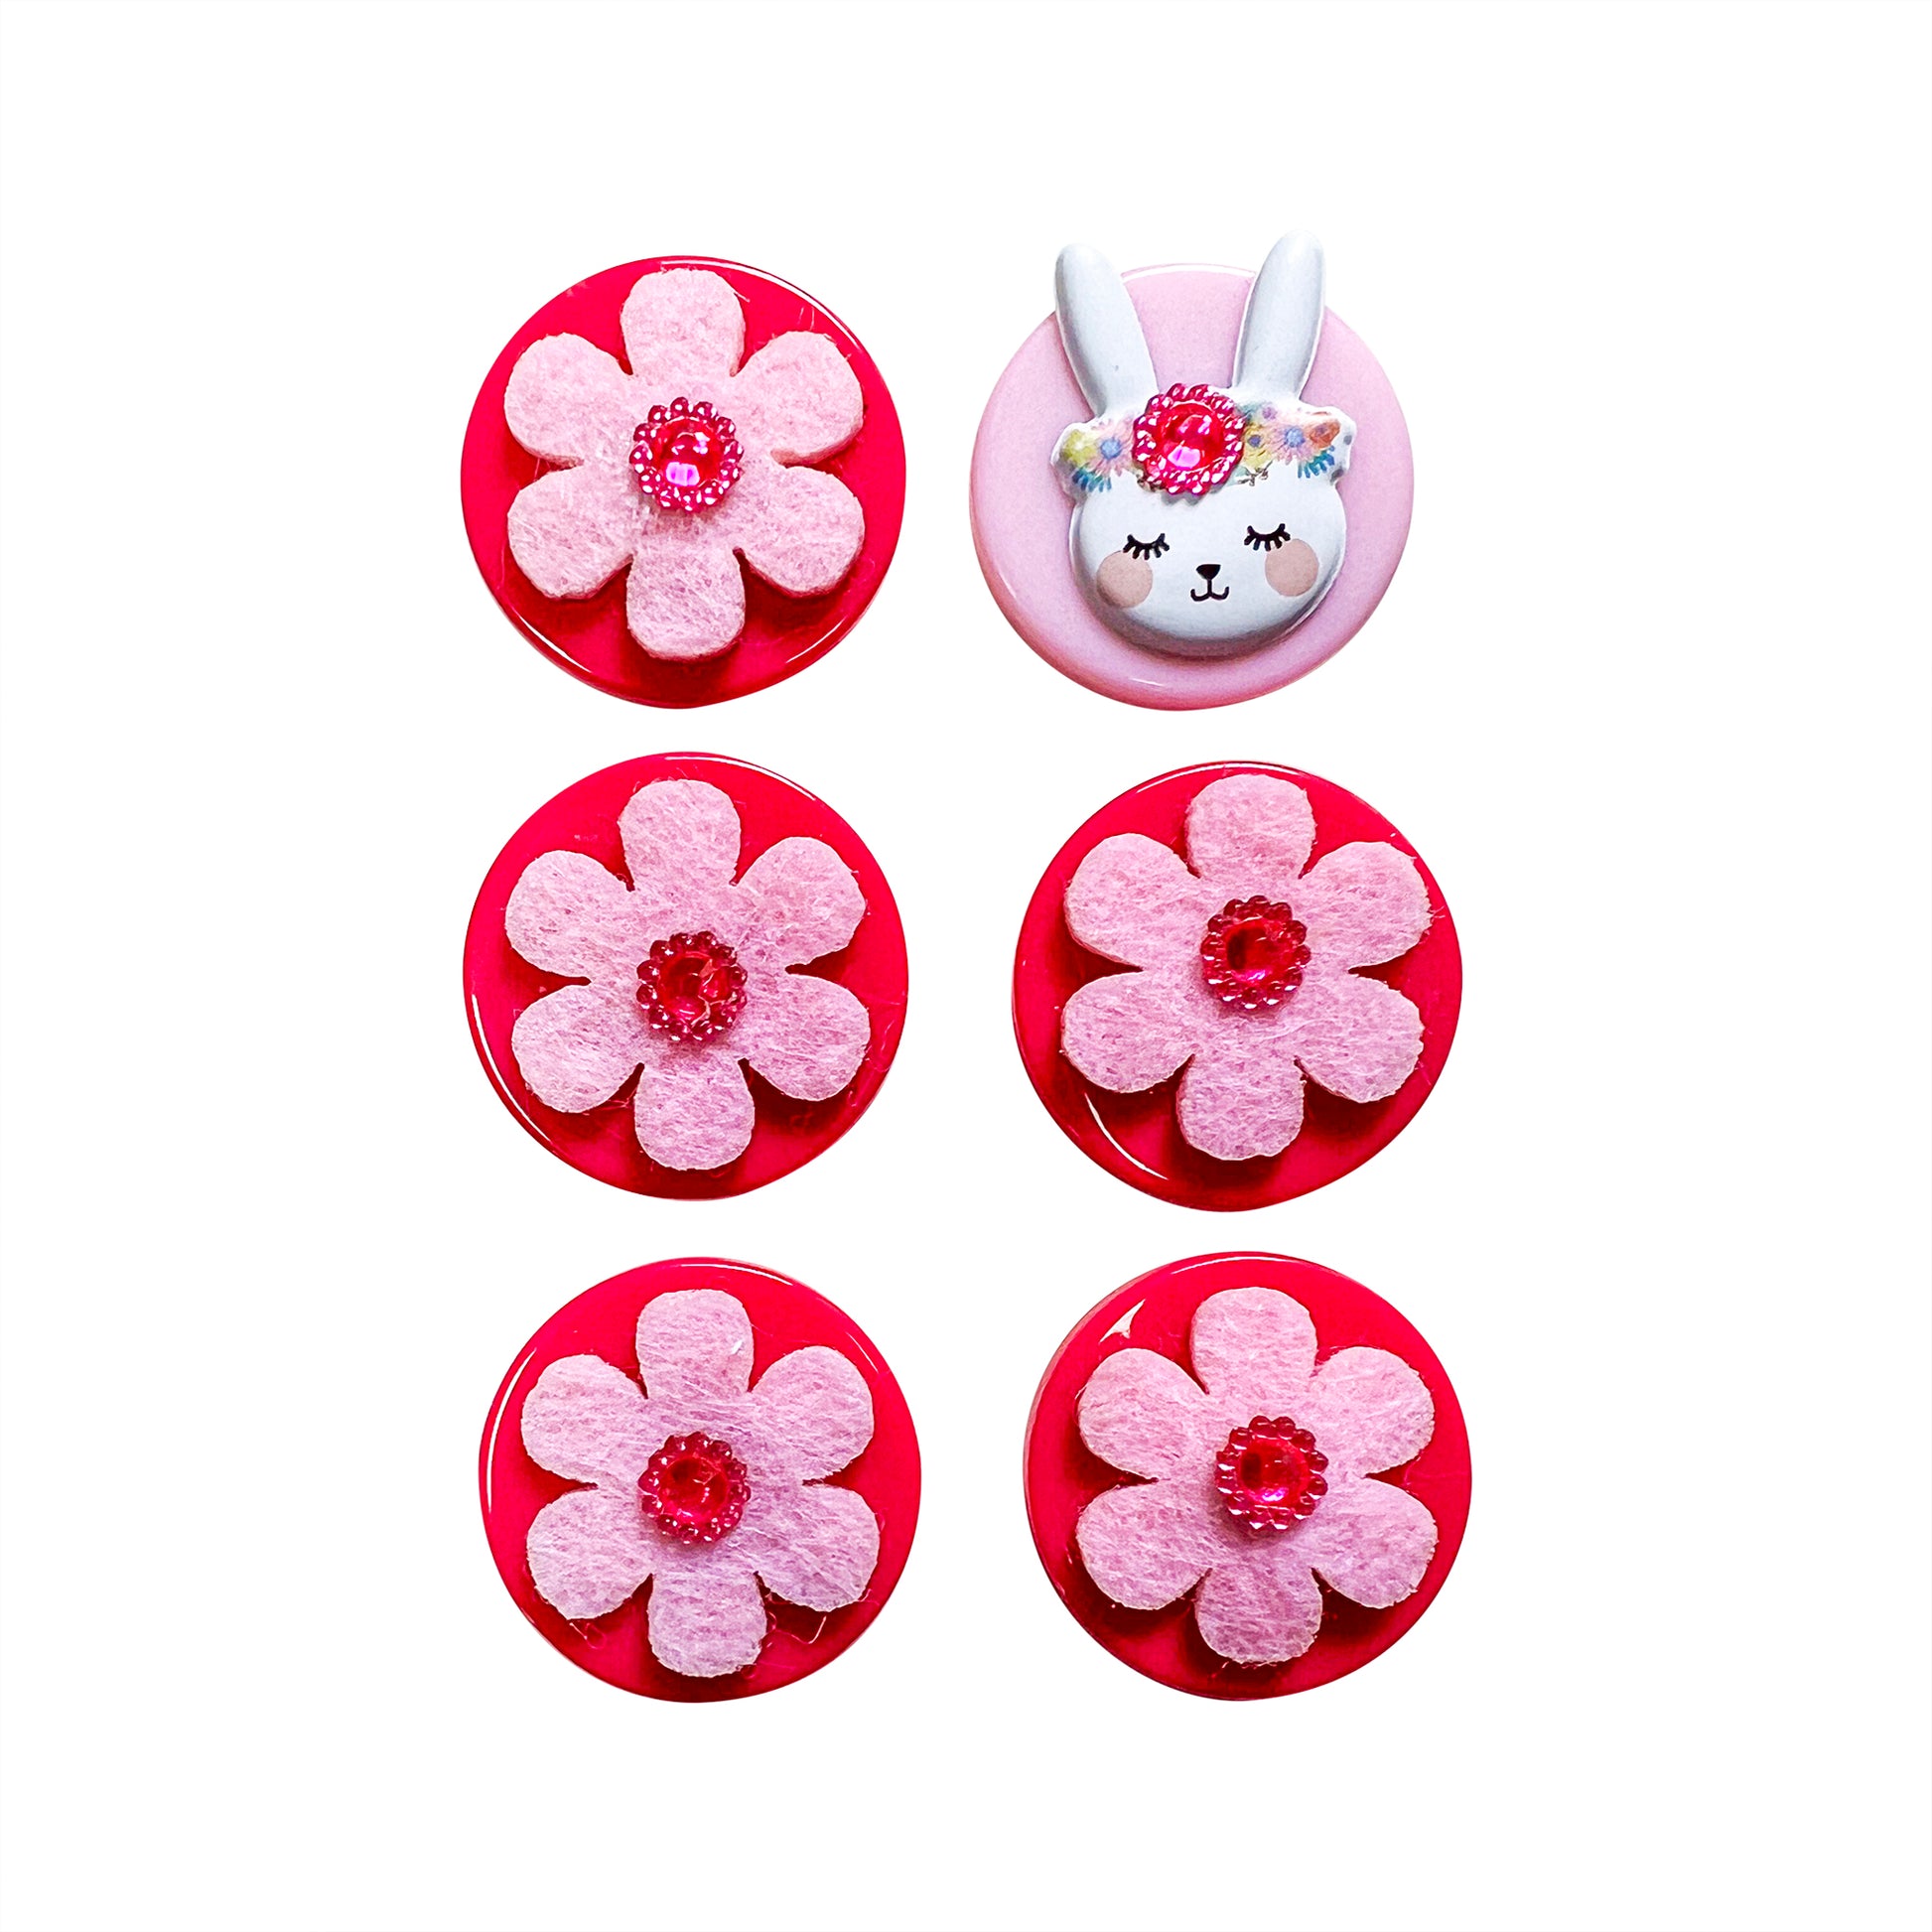 Glass Wrappings' set of 6 pink button embellishments. 4 are topped with pink felt flowers, and 1 with an adorable "angelic" bunny.